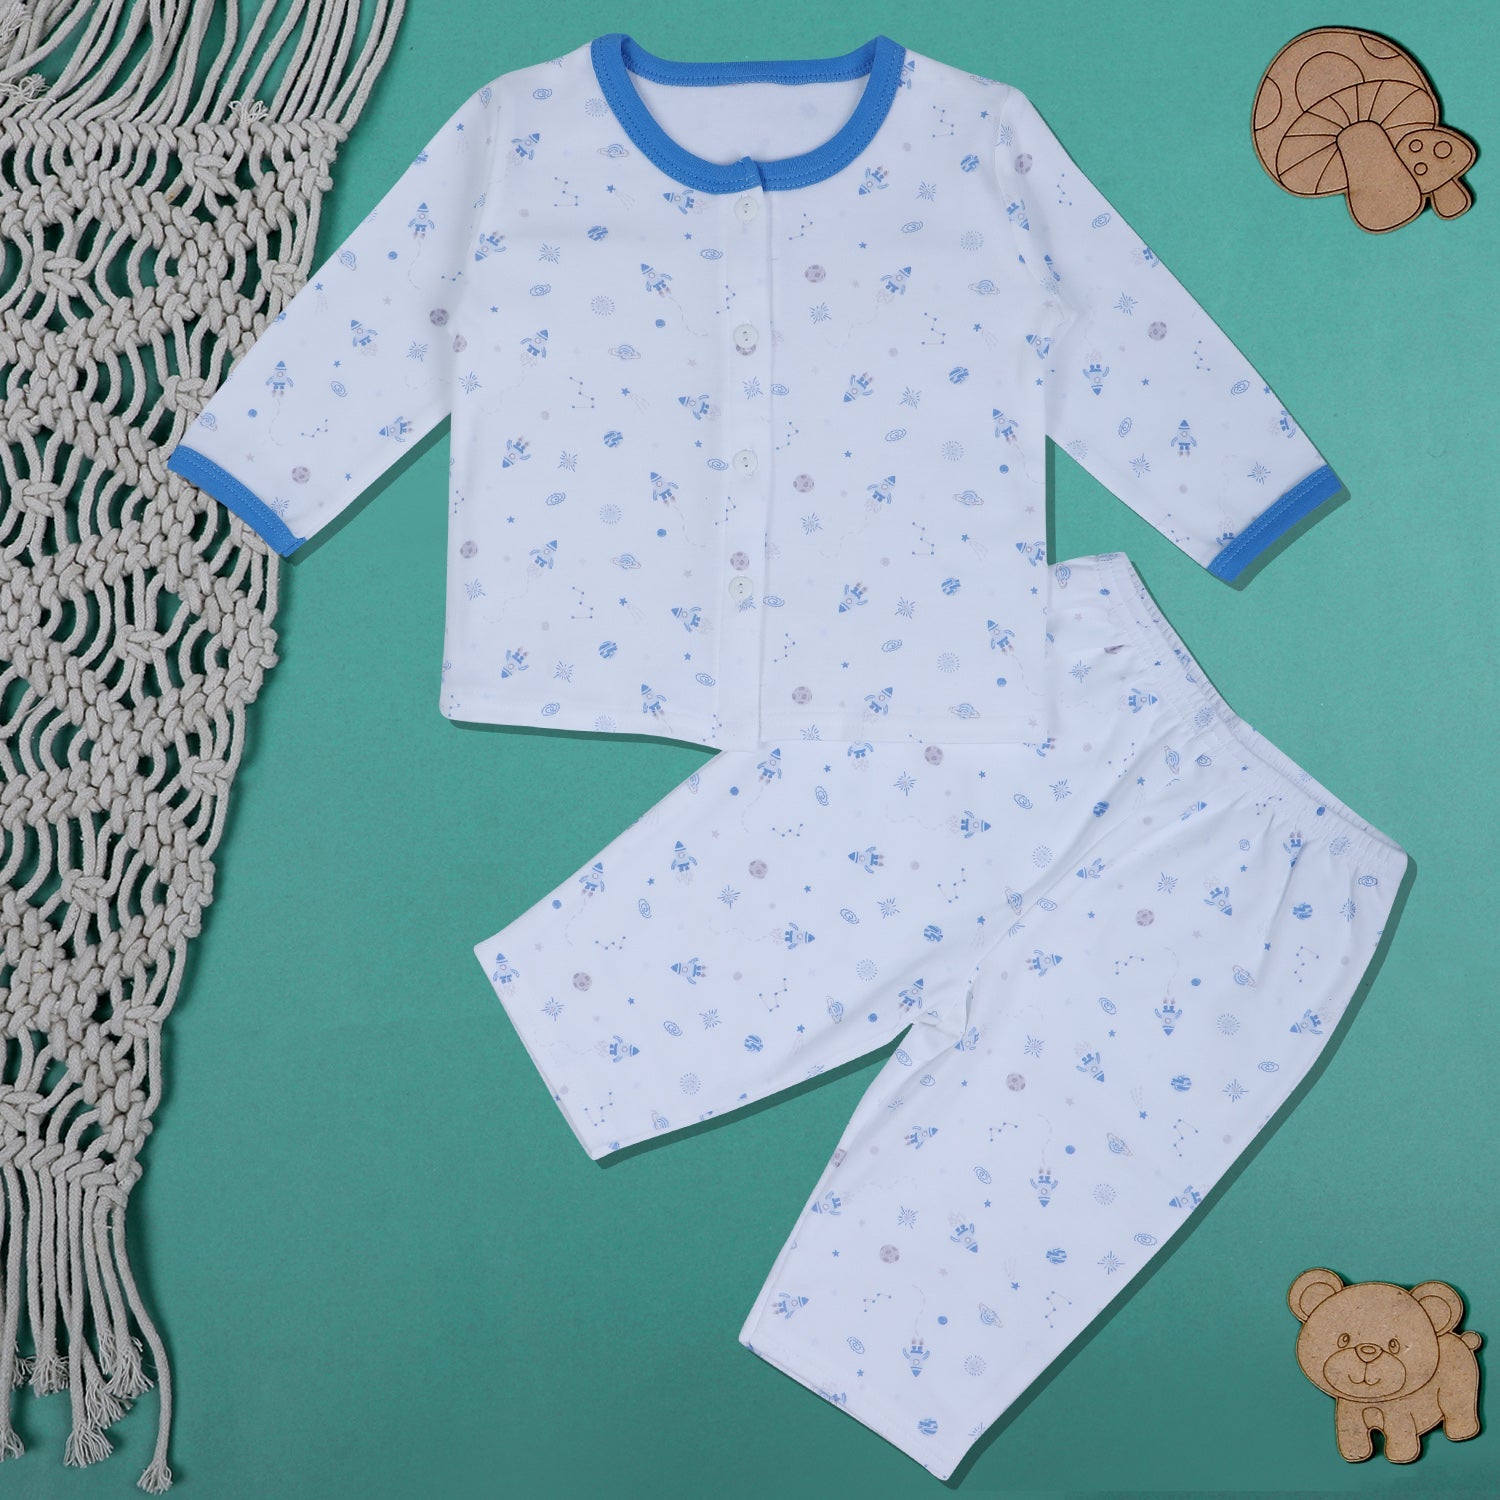 Baby Moo Space Mission Soft Cotton Full Sleeves Top And Pyjama 2pcs Night Suit - Blue - Baby Moo